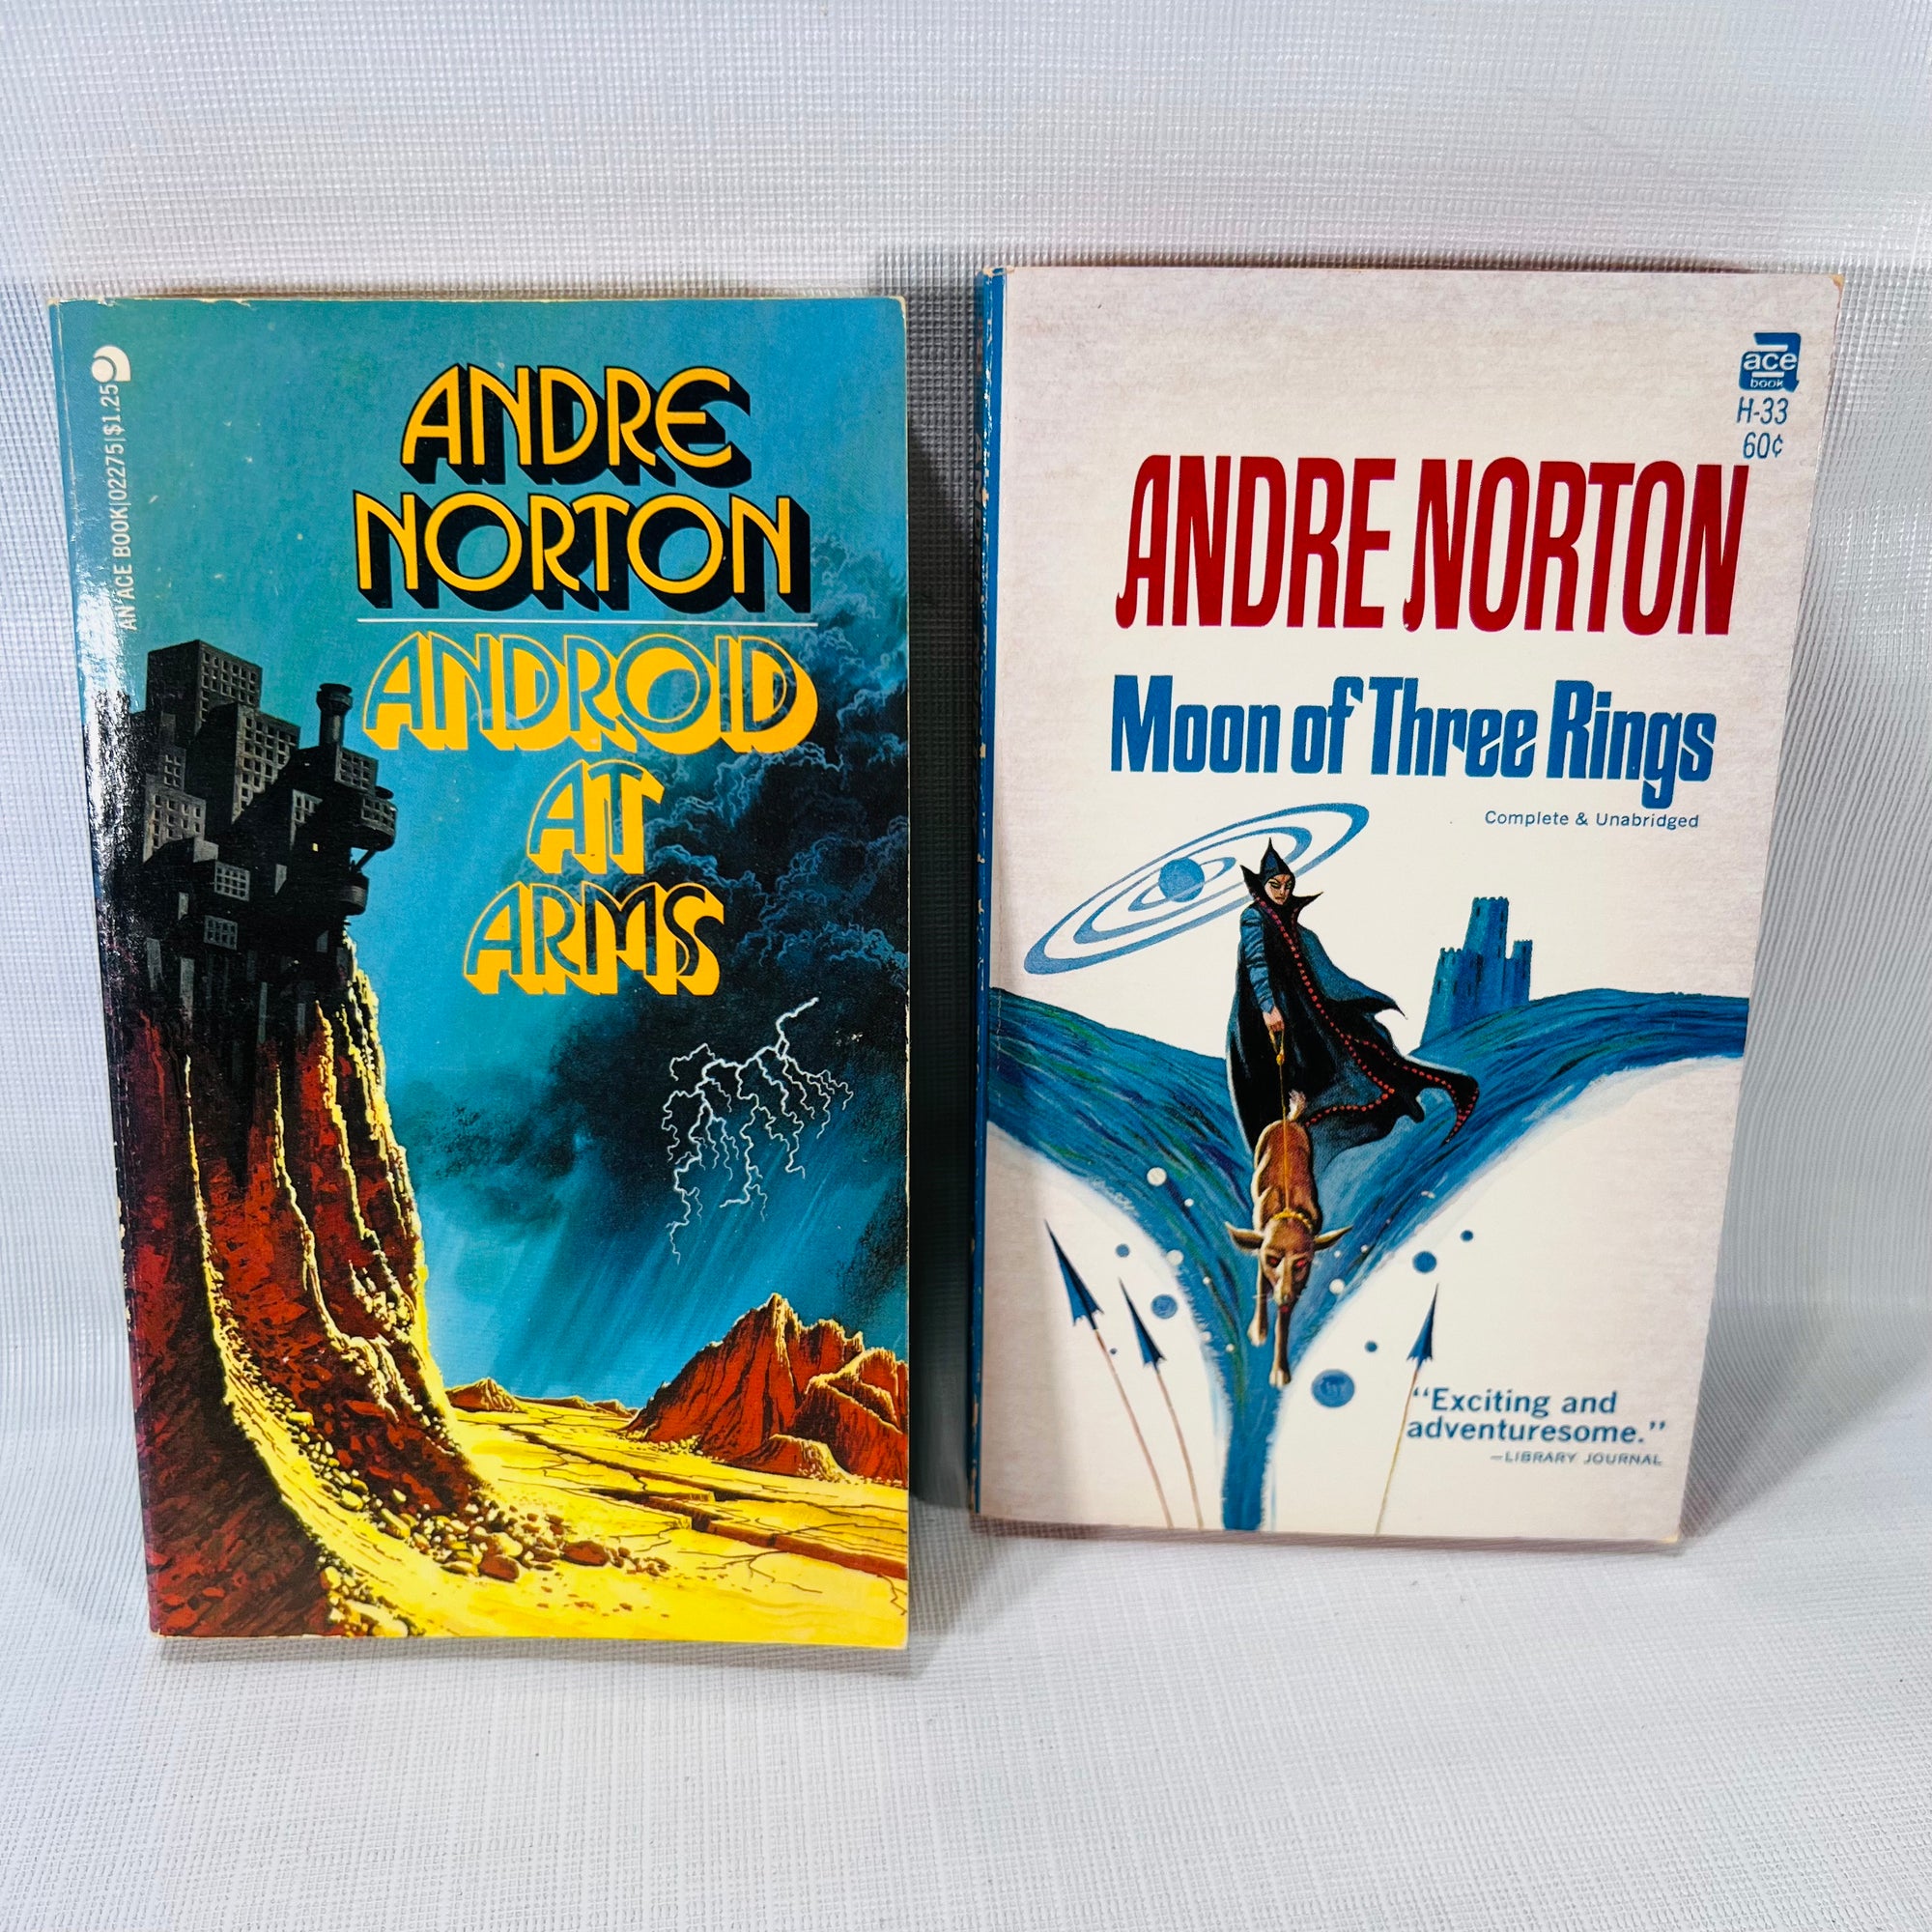 Two Andre Norton Paperback Books Moon of Three Rings 1966 Android at Arms 1973 Ace Books Inc